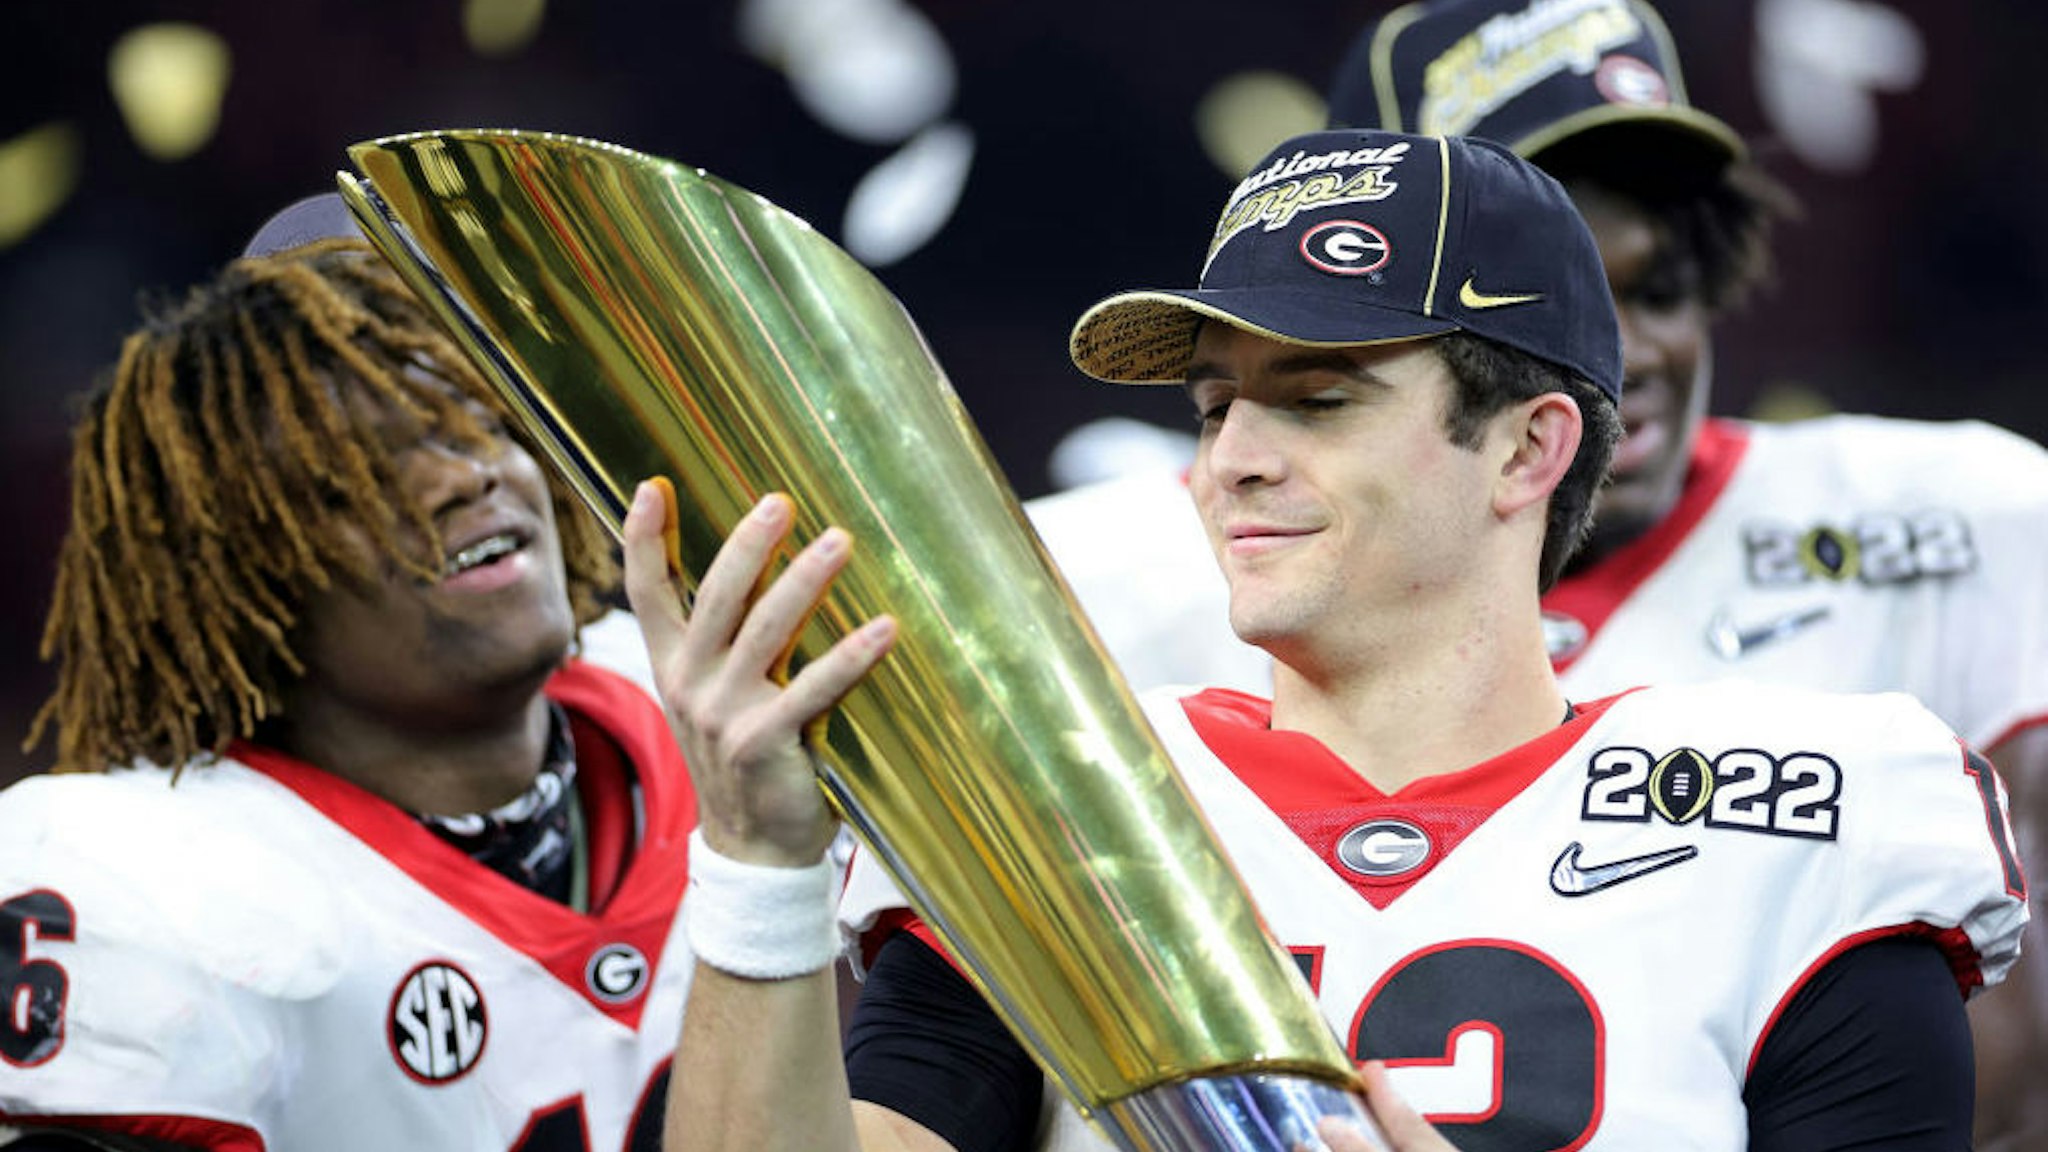 INDIANAPOLIS, INDIANA - JANUARY 10: Stetson Bennett #13 of the Georgia Bulldogs celebrates with the National Championship trophy after the Georgia Bulldogs defeated the Alabama Crimson Tide 33-18 during the 2022 CFP National Championship Game at Lucas Oil Stadium on January 10, 2022 in Indianapolis, Indiana. (Photo by Carmen Mandato/Getty Images)